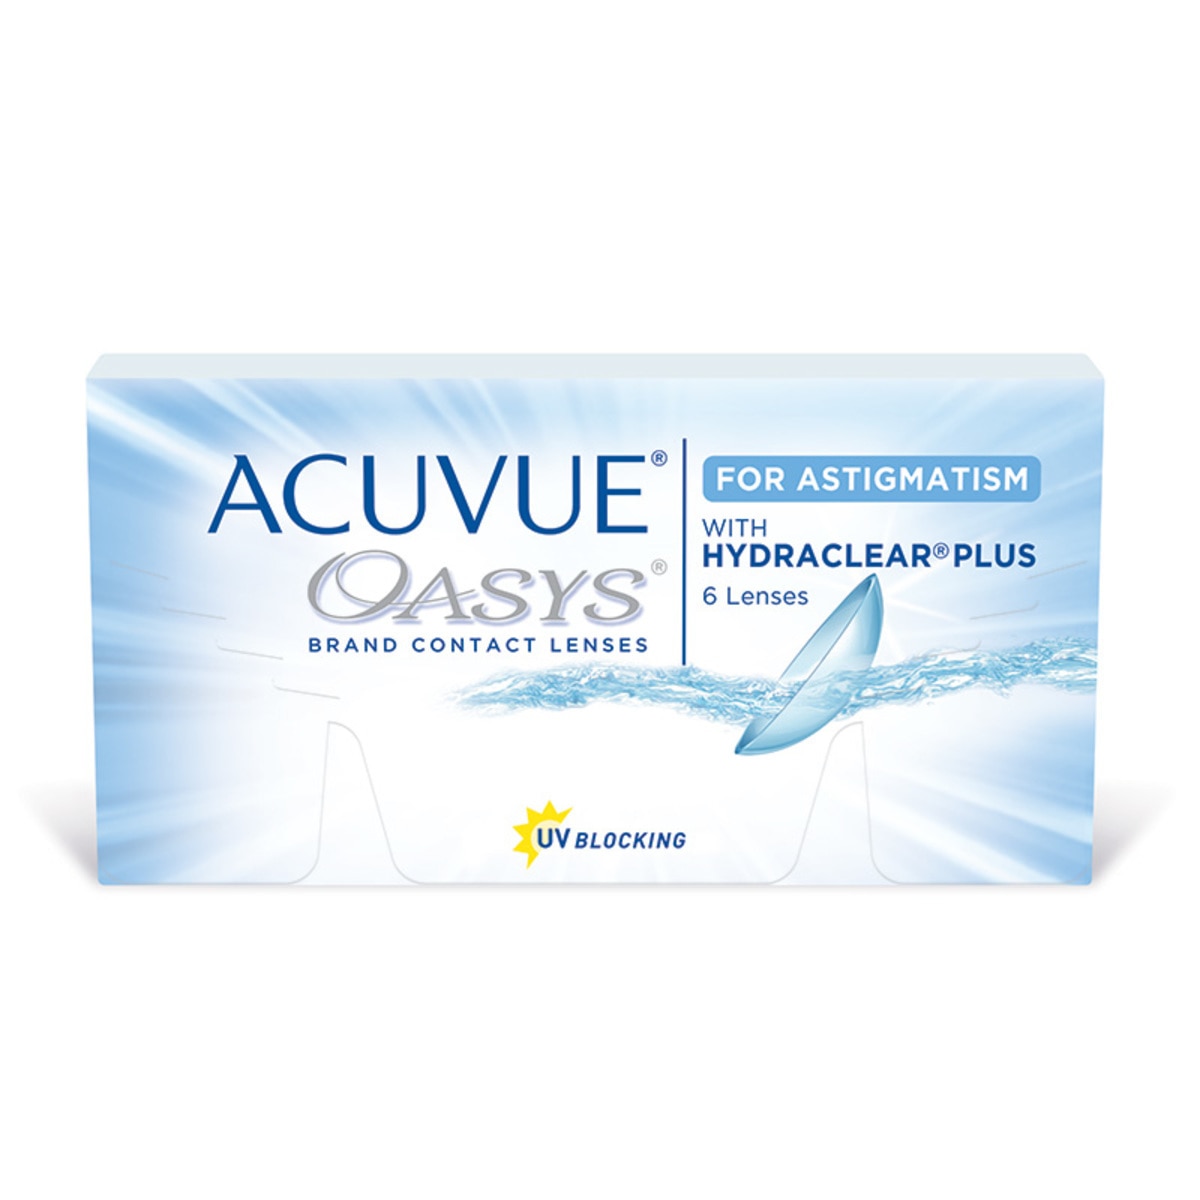 ACUVUE OASYS® con HYDRACLEAR Plus® para Astigmatismo (D -4.25, Cyl/Axis -1.75/80)